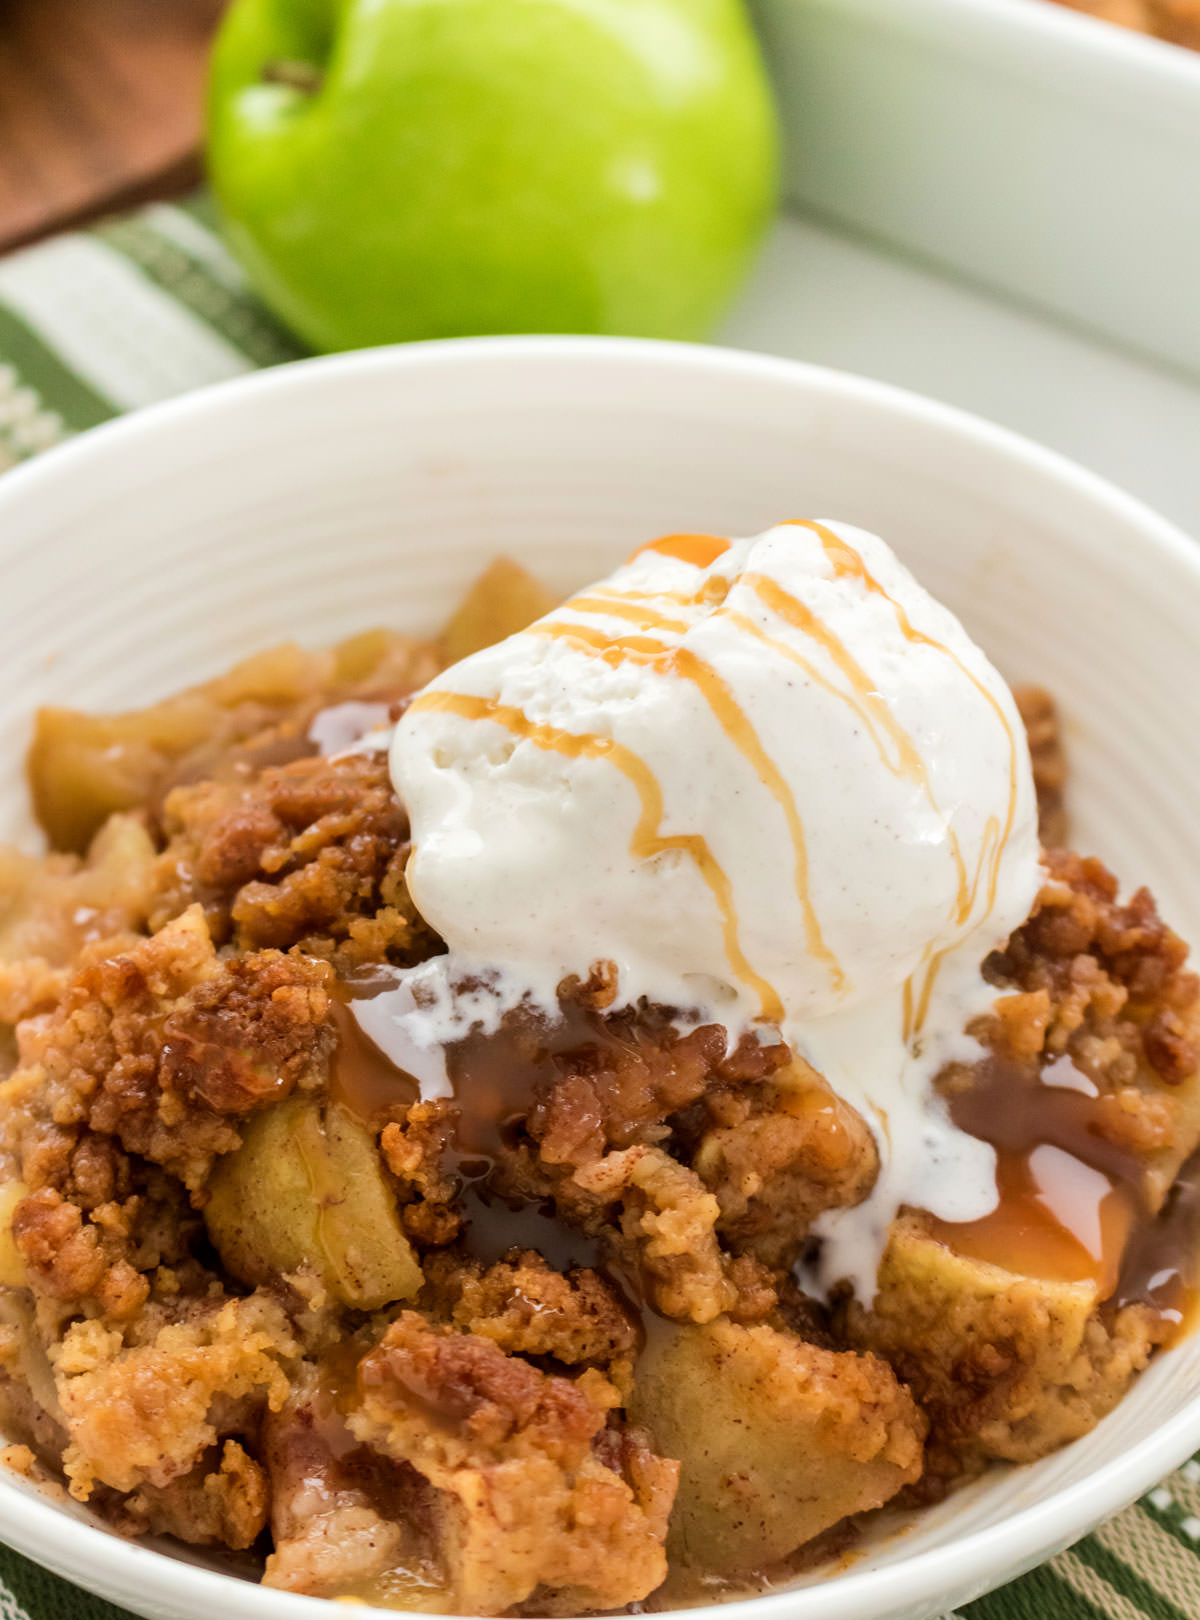 Closeup on a white bowl filled with homemade Apple Cobbler with a scoop of Vanilla Ice Cream that has been drizzled with caramel syrup.